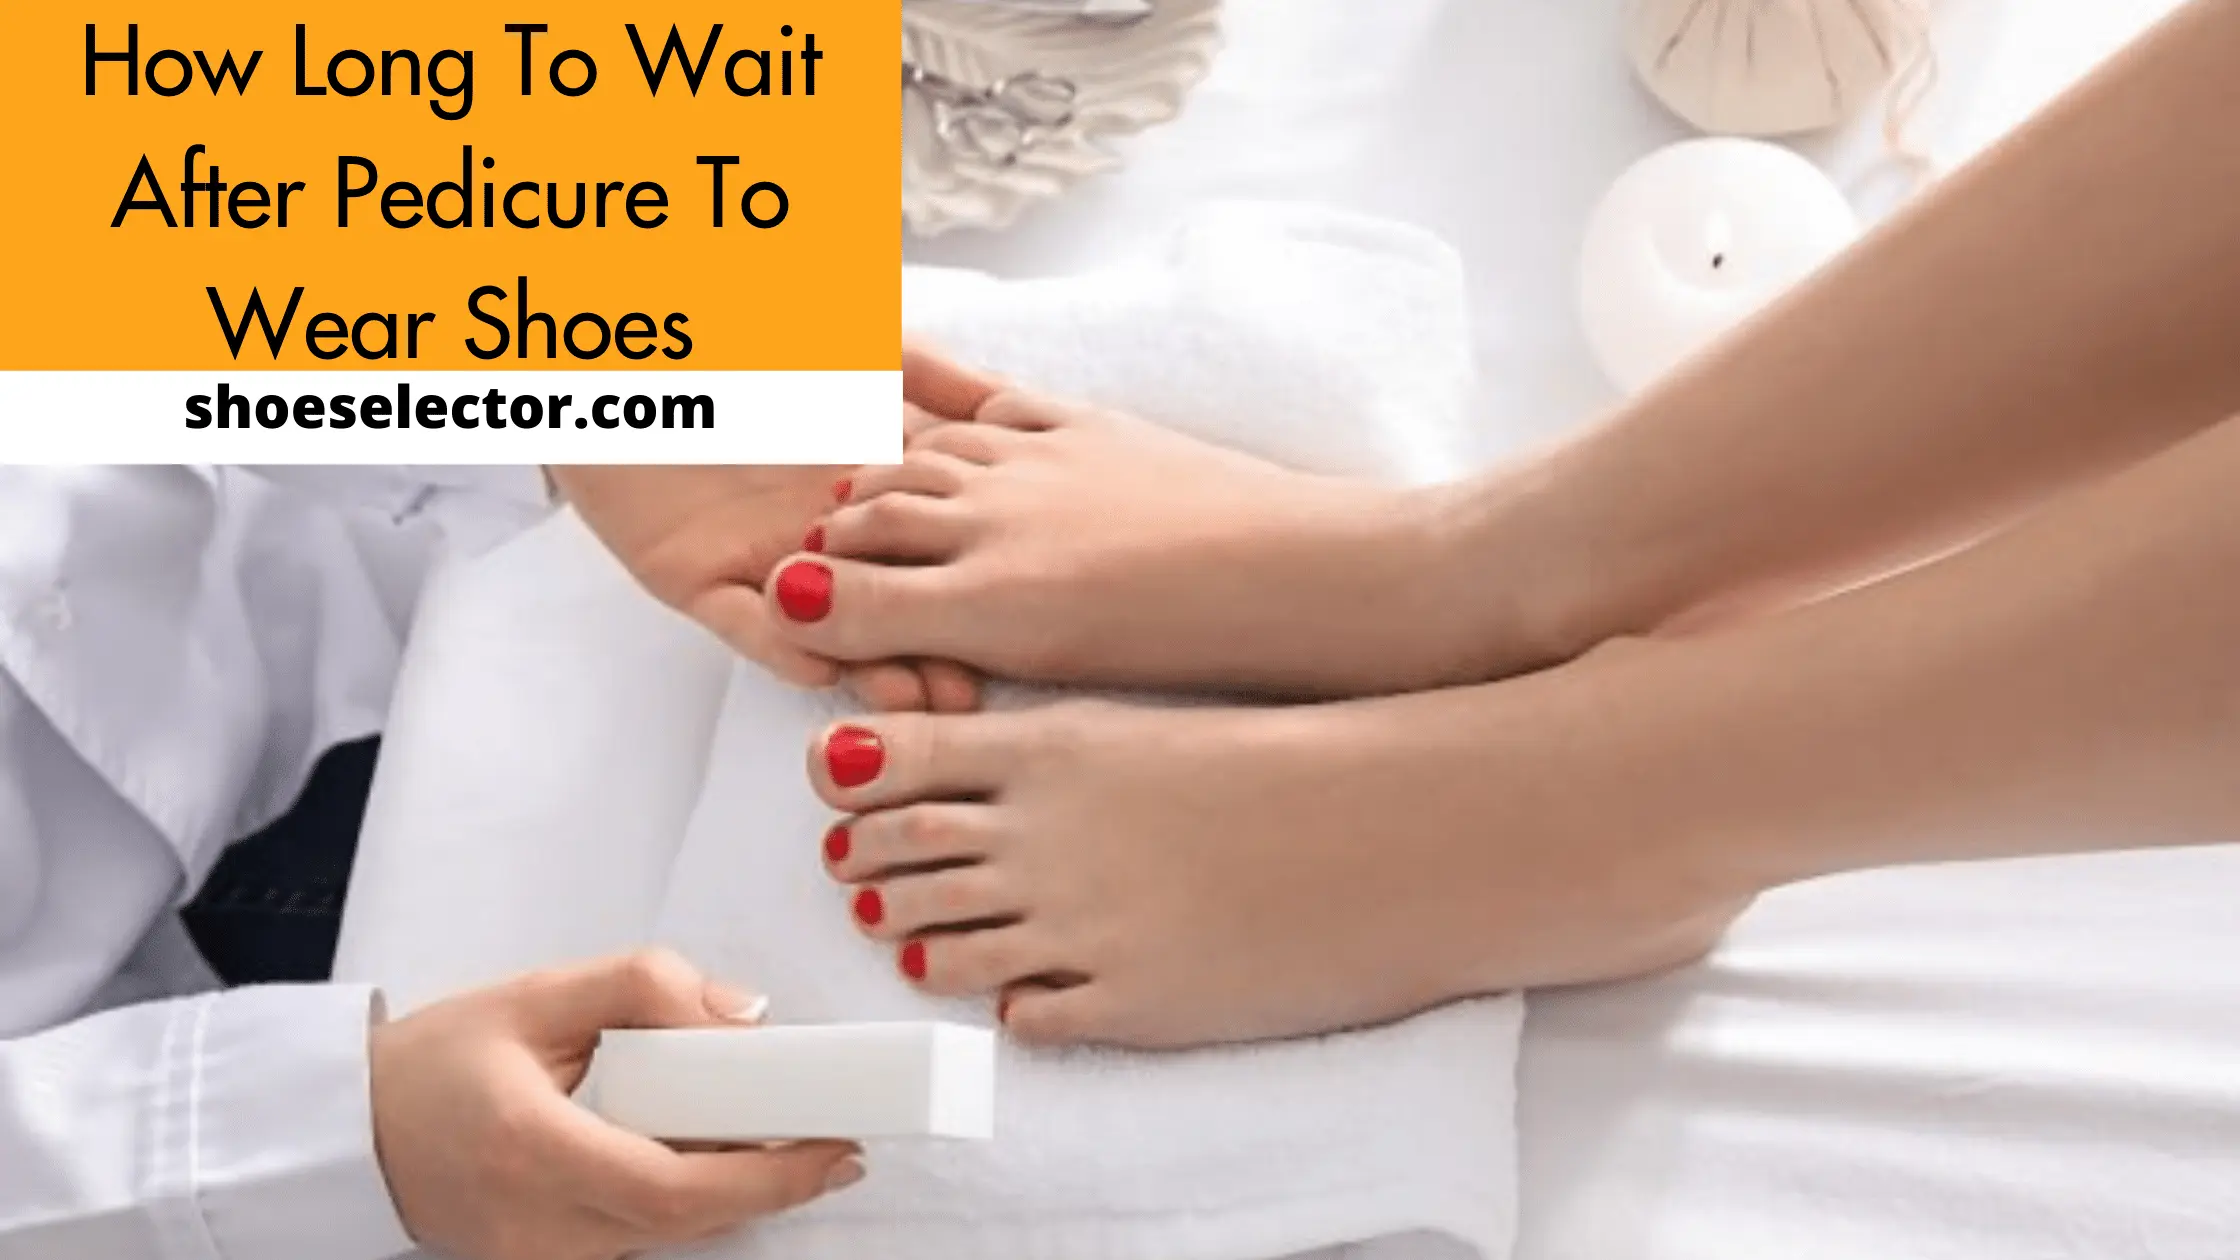 How Long To Wait After Pedicure To Wear Shoes? - #1 Guide